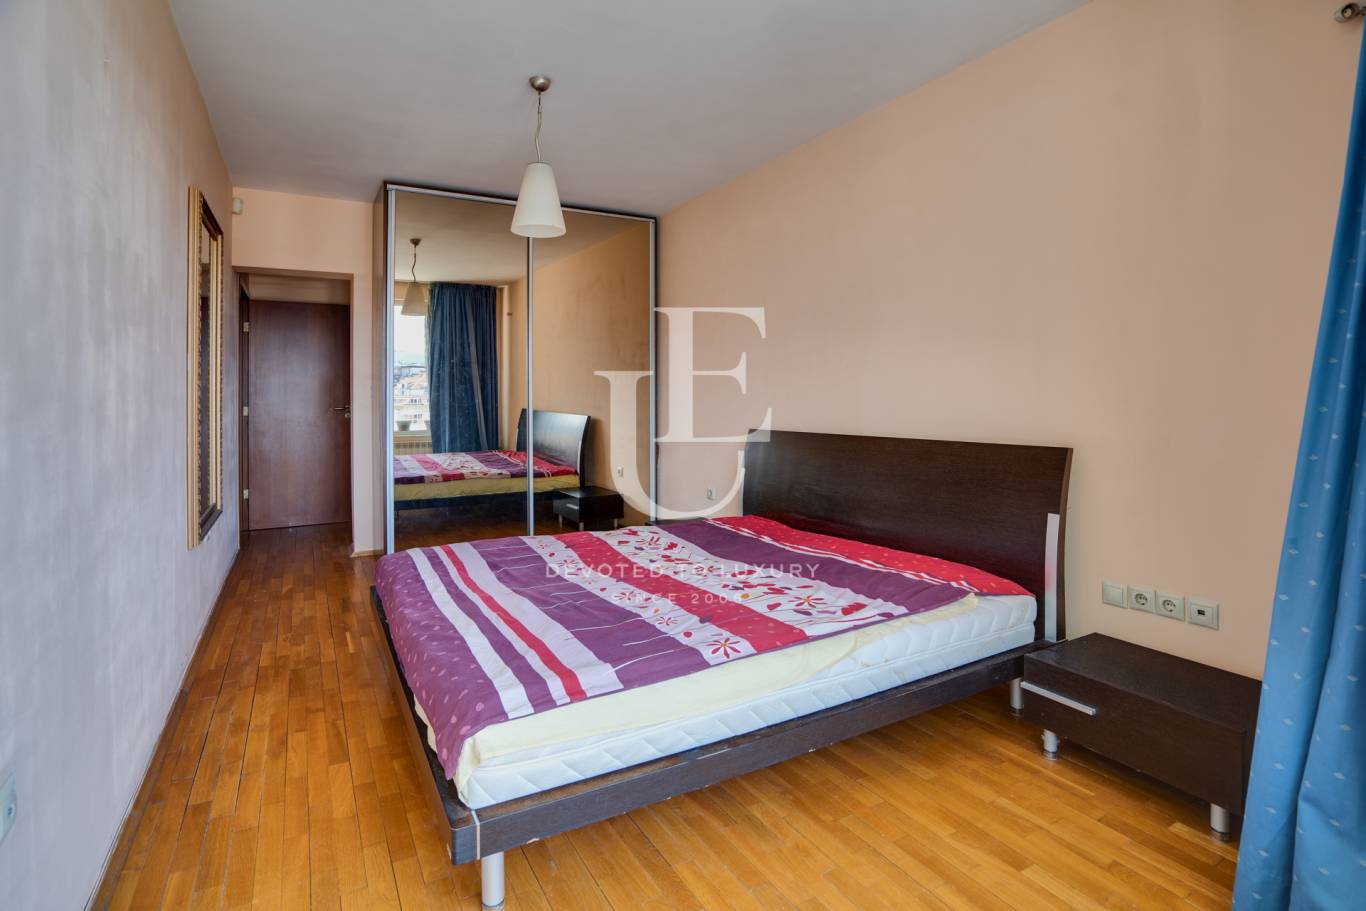 Apartment for sale in Sofia, Lozenets with listing ID: K6754 - image 4